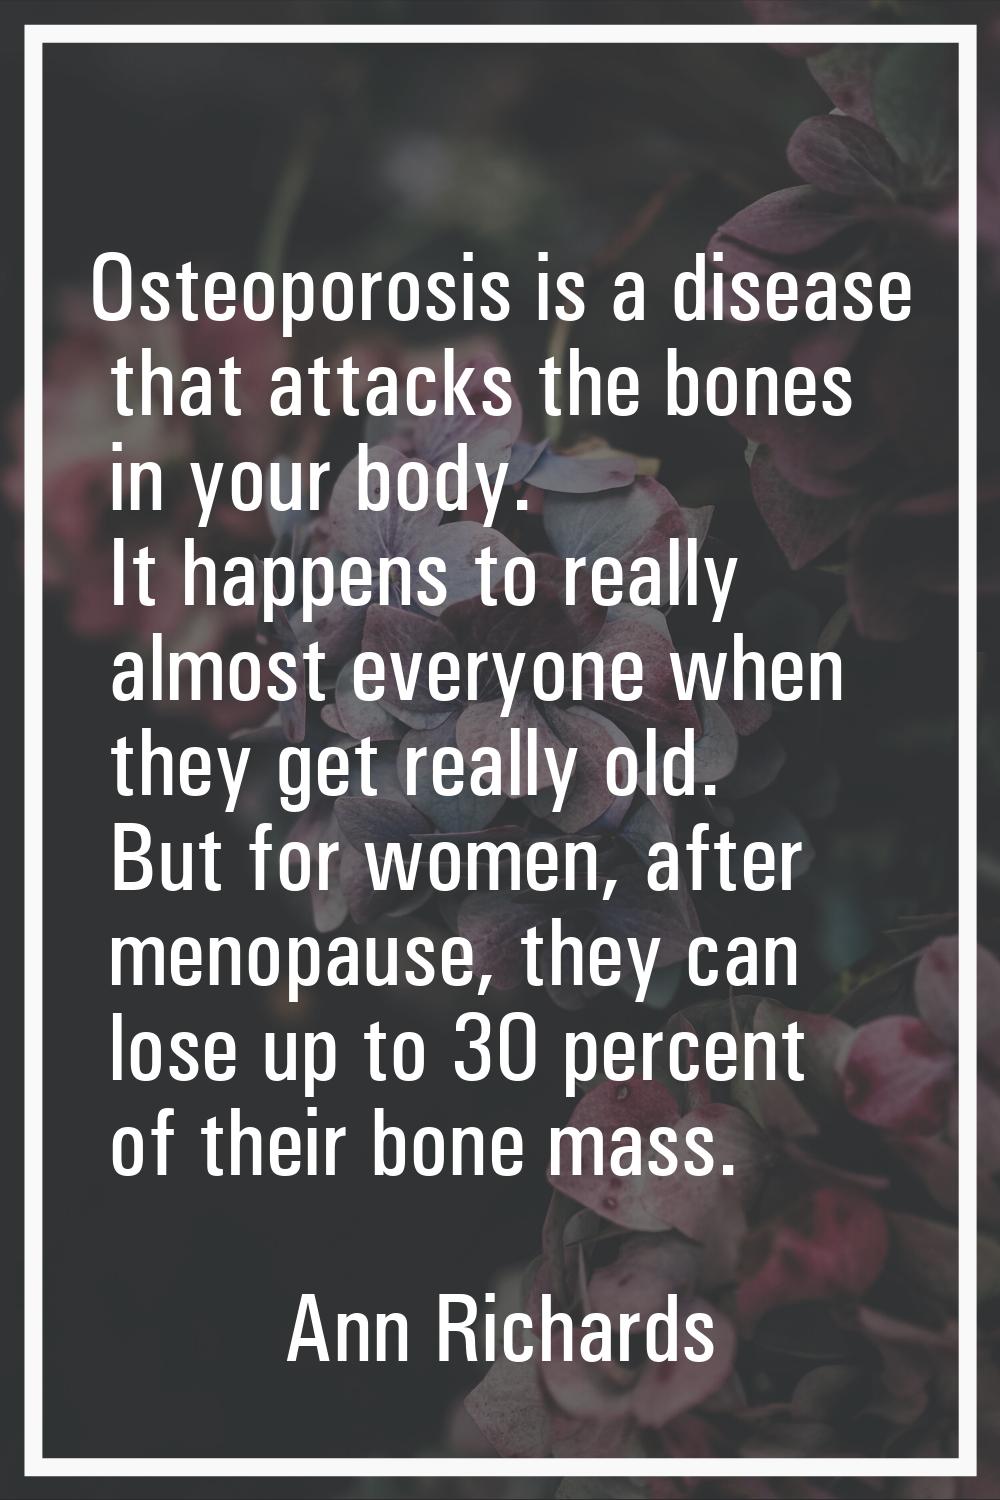 Osteoporosis is a disease that attacks the bones in your body. It happens to really almost everyone